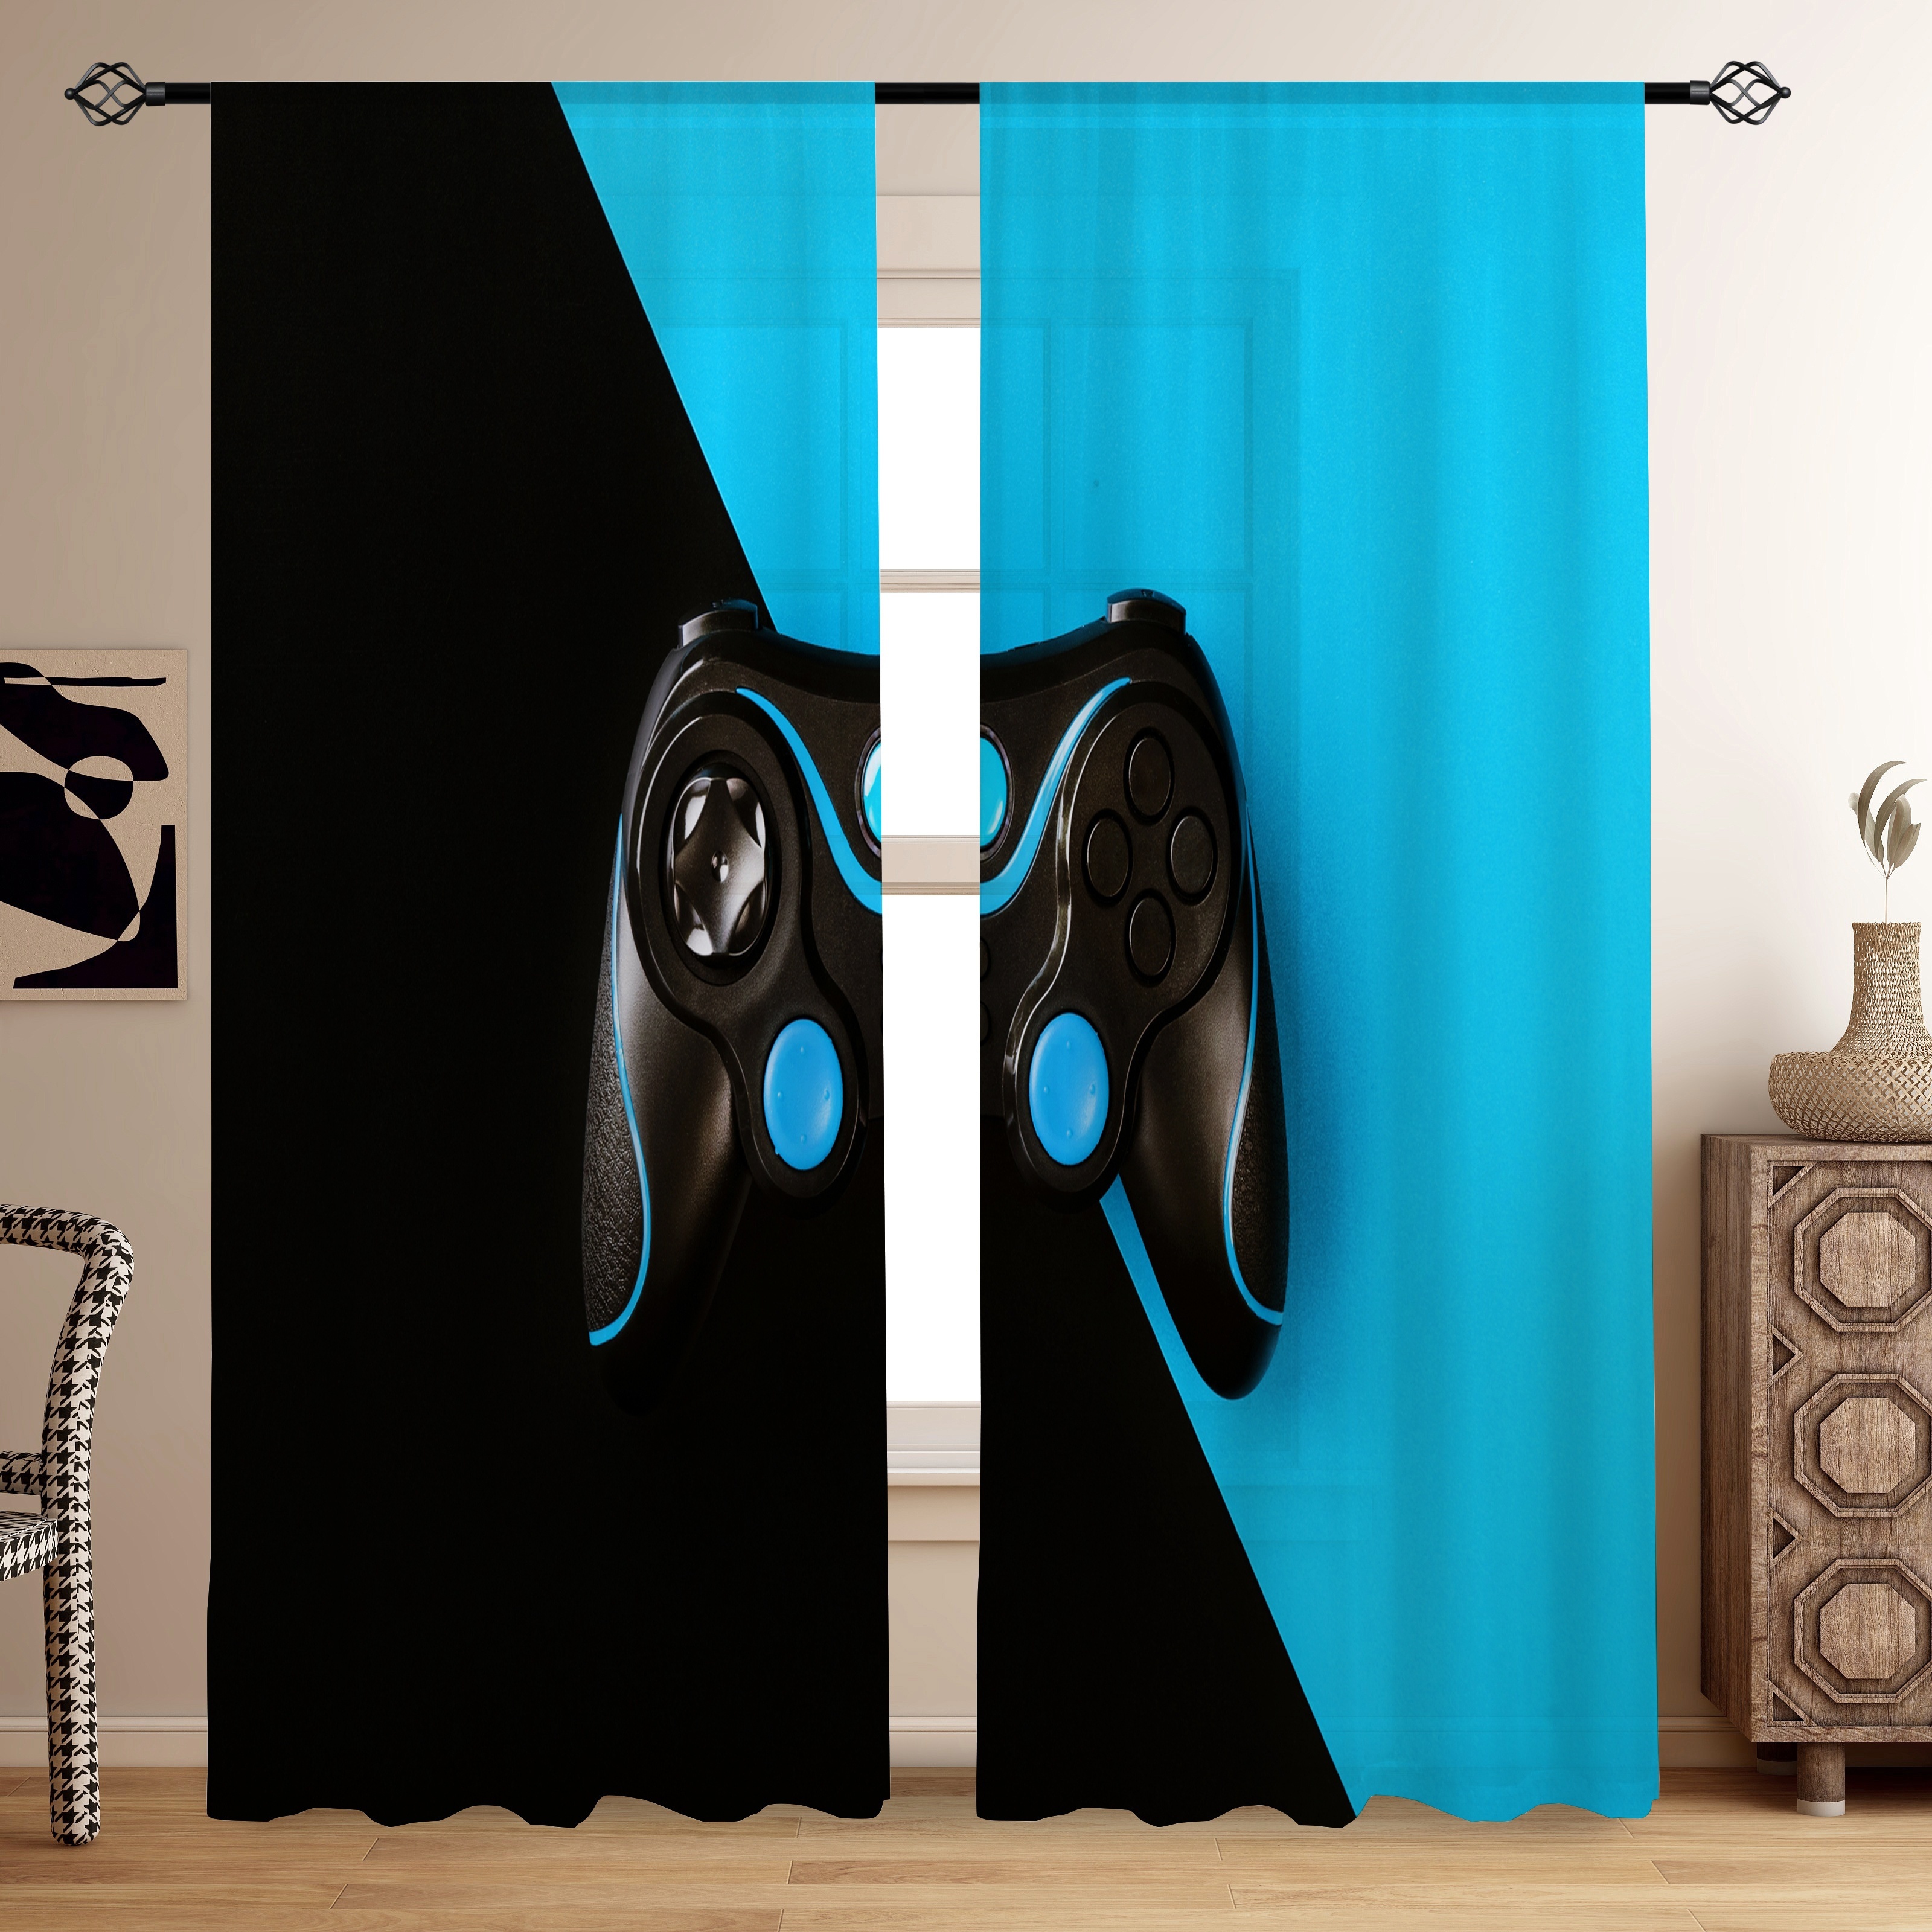 

2pcs, Gamepad Black Blue Bottom Printed Translucent Curtains, Multi-scene Polyester Rod Pocket Decorative Curtains For Living Room Bedroom Home Decor Party Supplies